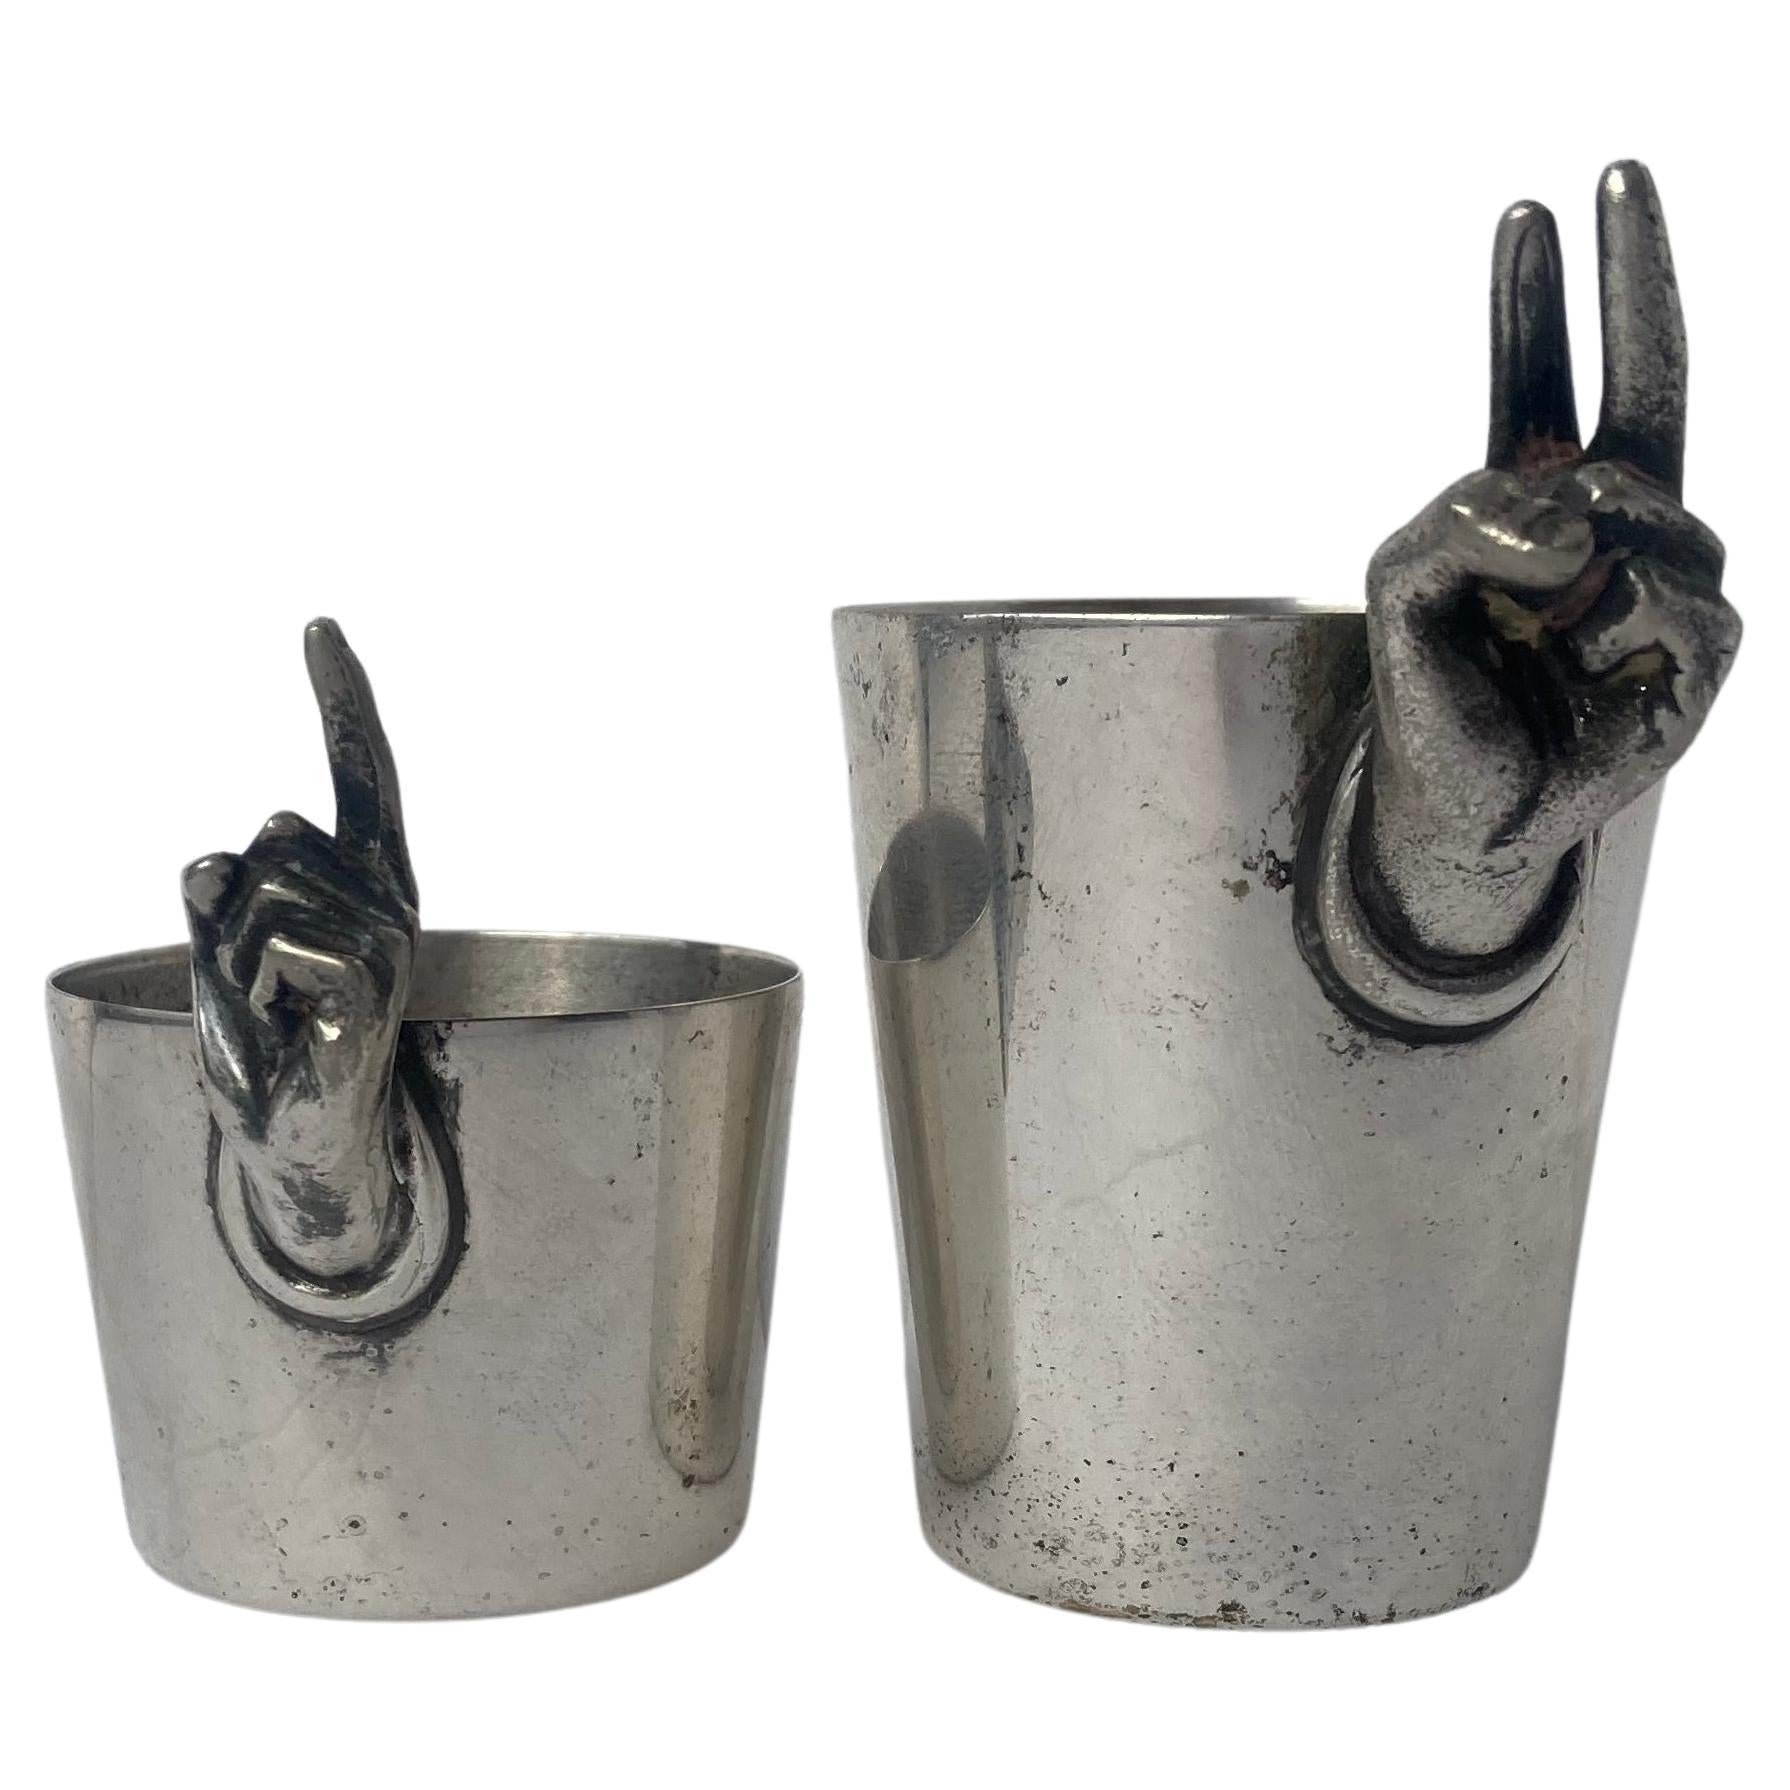 https://a.1stdibscdn.com/napier-art-deco-set-one-and-two-shots-jigger-cup-measures-silver-plate-for-sale/f_8089/f_318899221671752101141/f_31889922_1671752101843_bg_processed.jpg